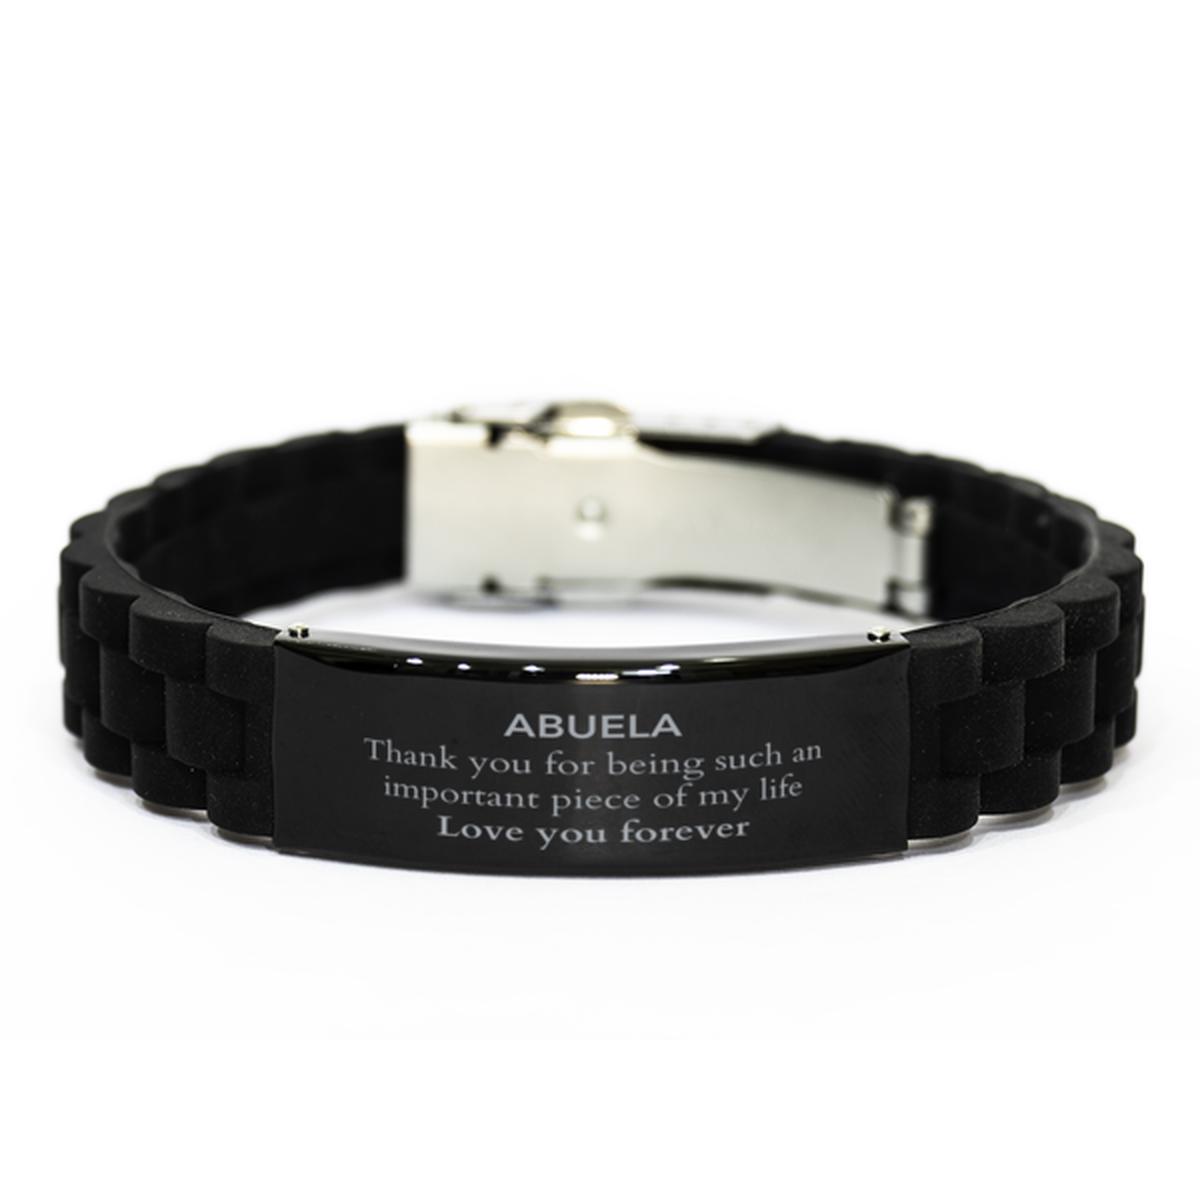 Appropriate Abuela Black Glidelock Clasp Bracelet Epic Birthday Gifts for Abuela Thank you for being such an important piece of my life Abuela Christmas Mothers Fathers Day